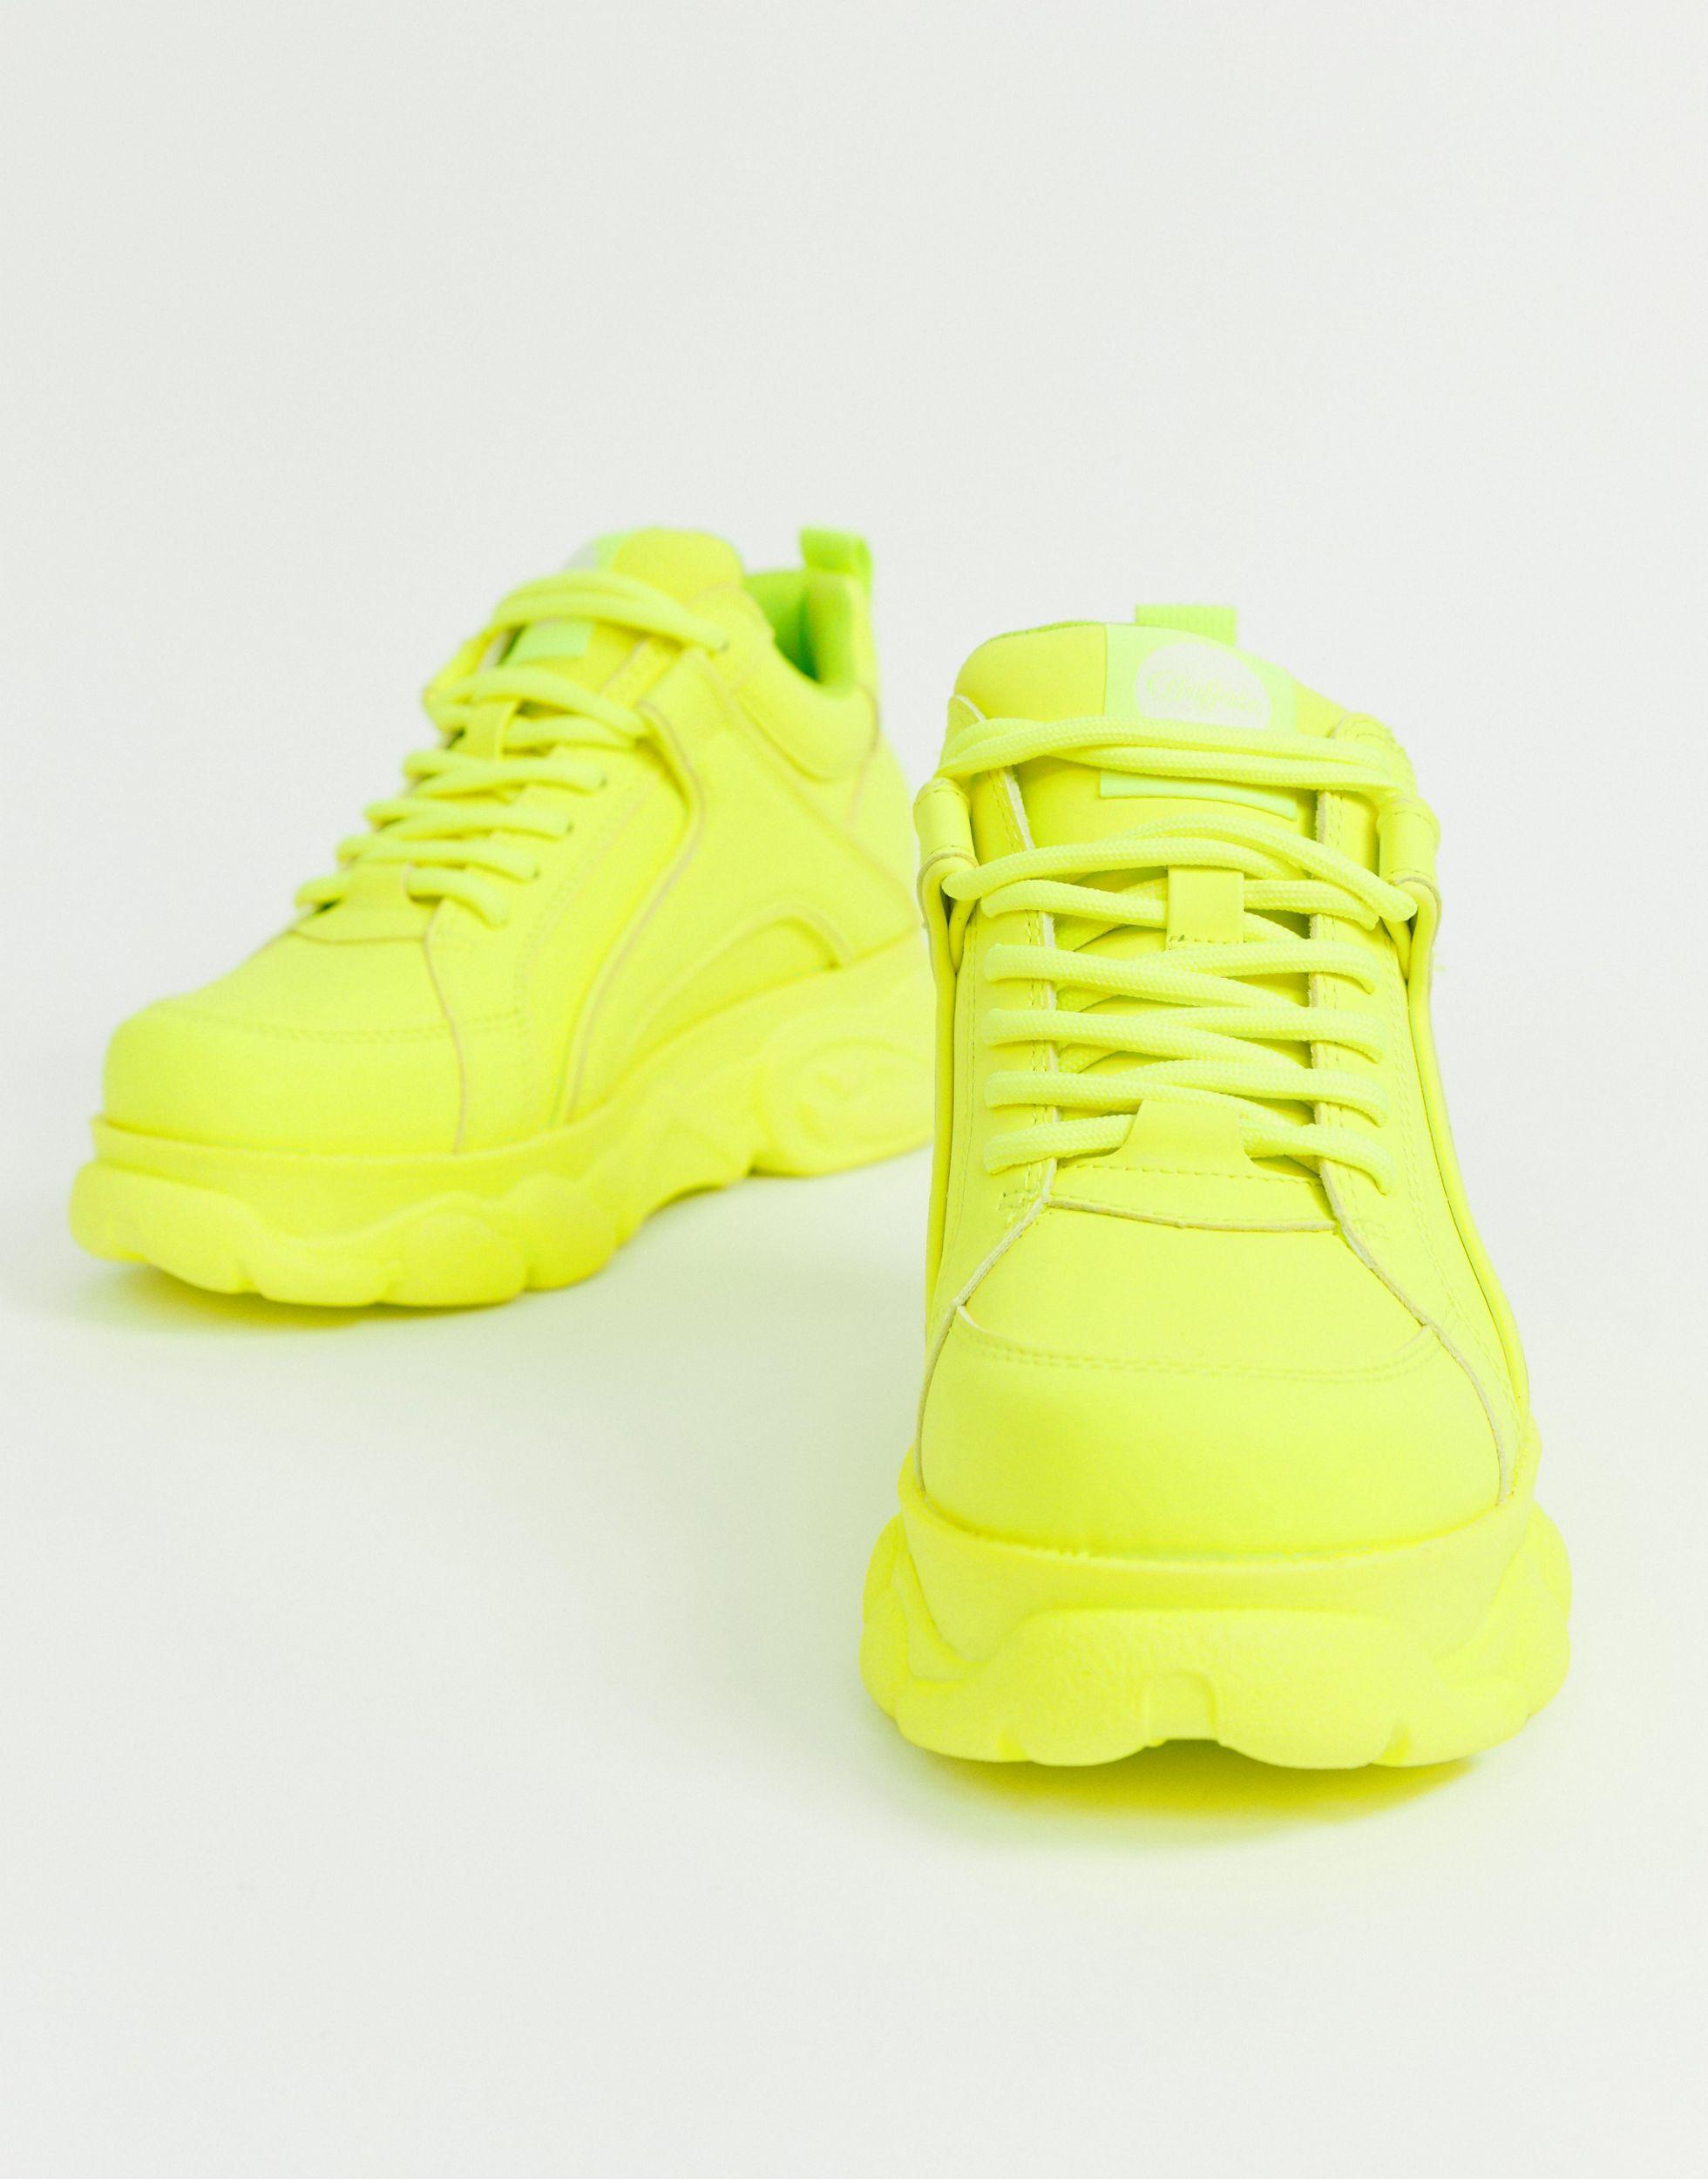 Buffalo Leather Corin Neon Lowtop Platform Trainer in Yellow - Lyst